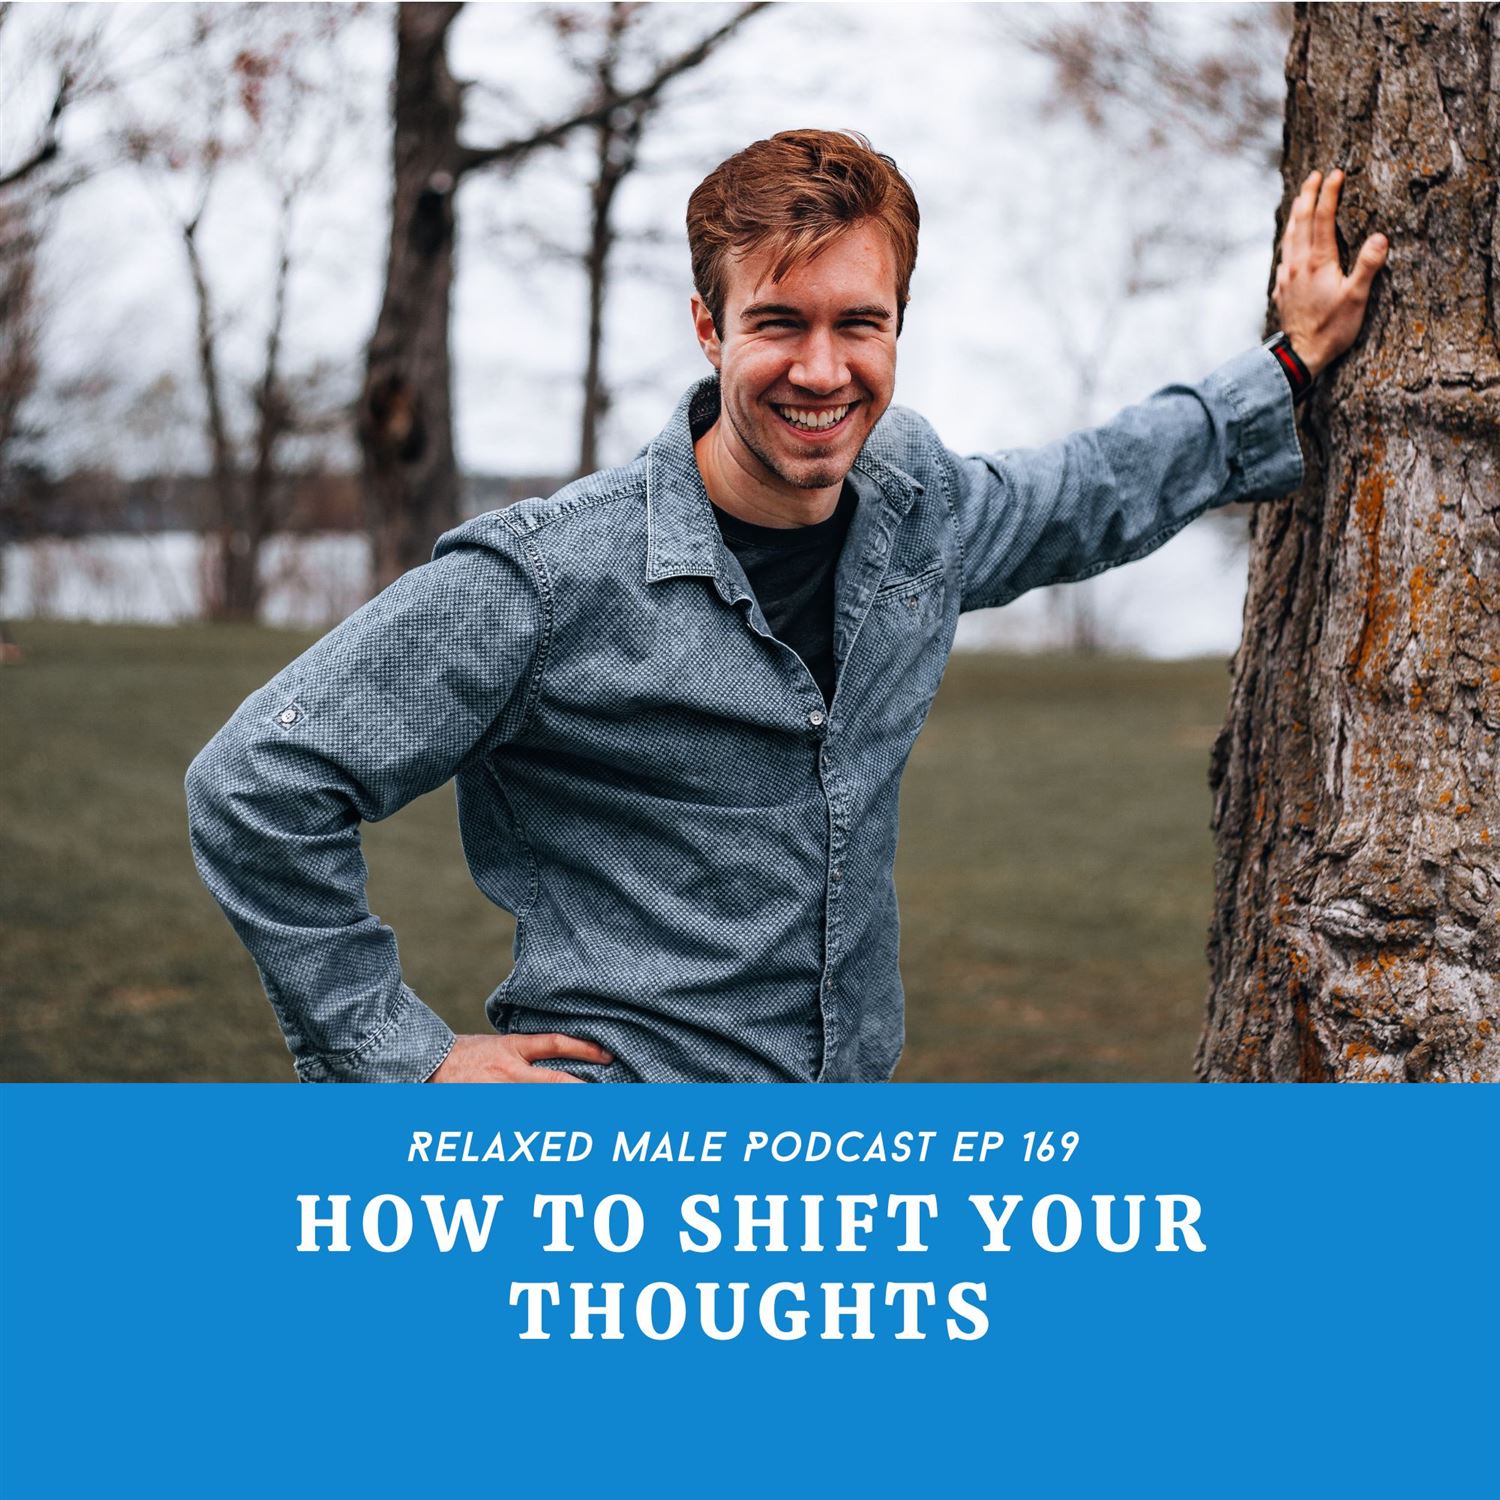 How To Shift Your Thoughts